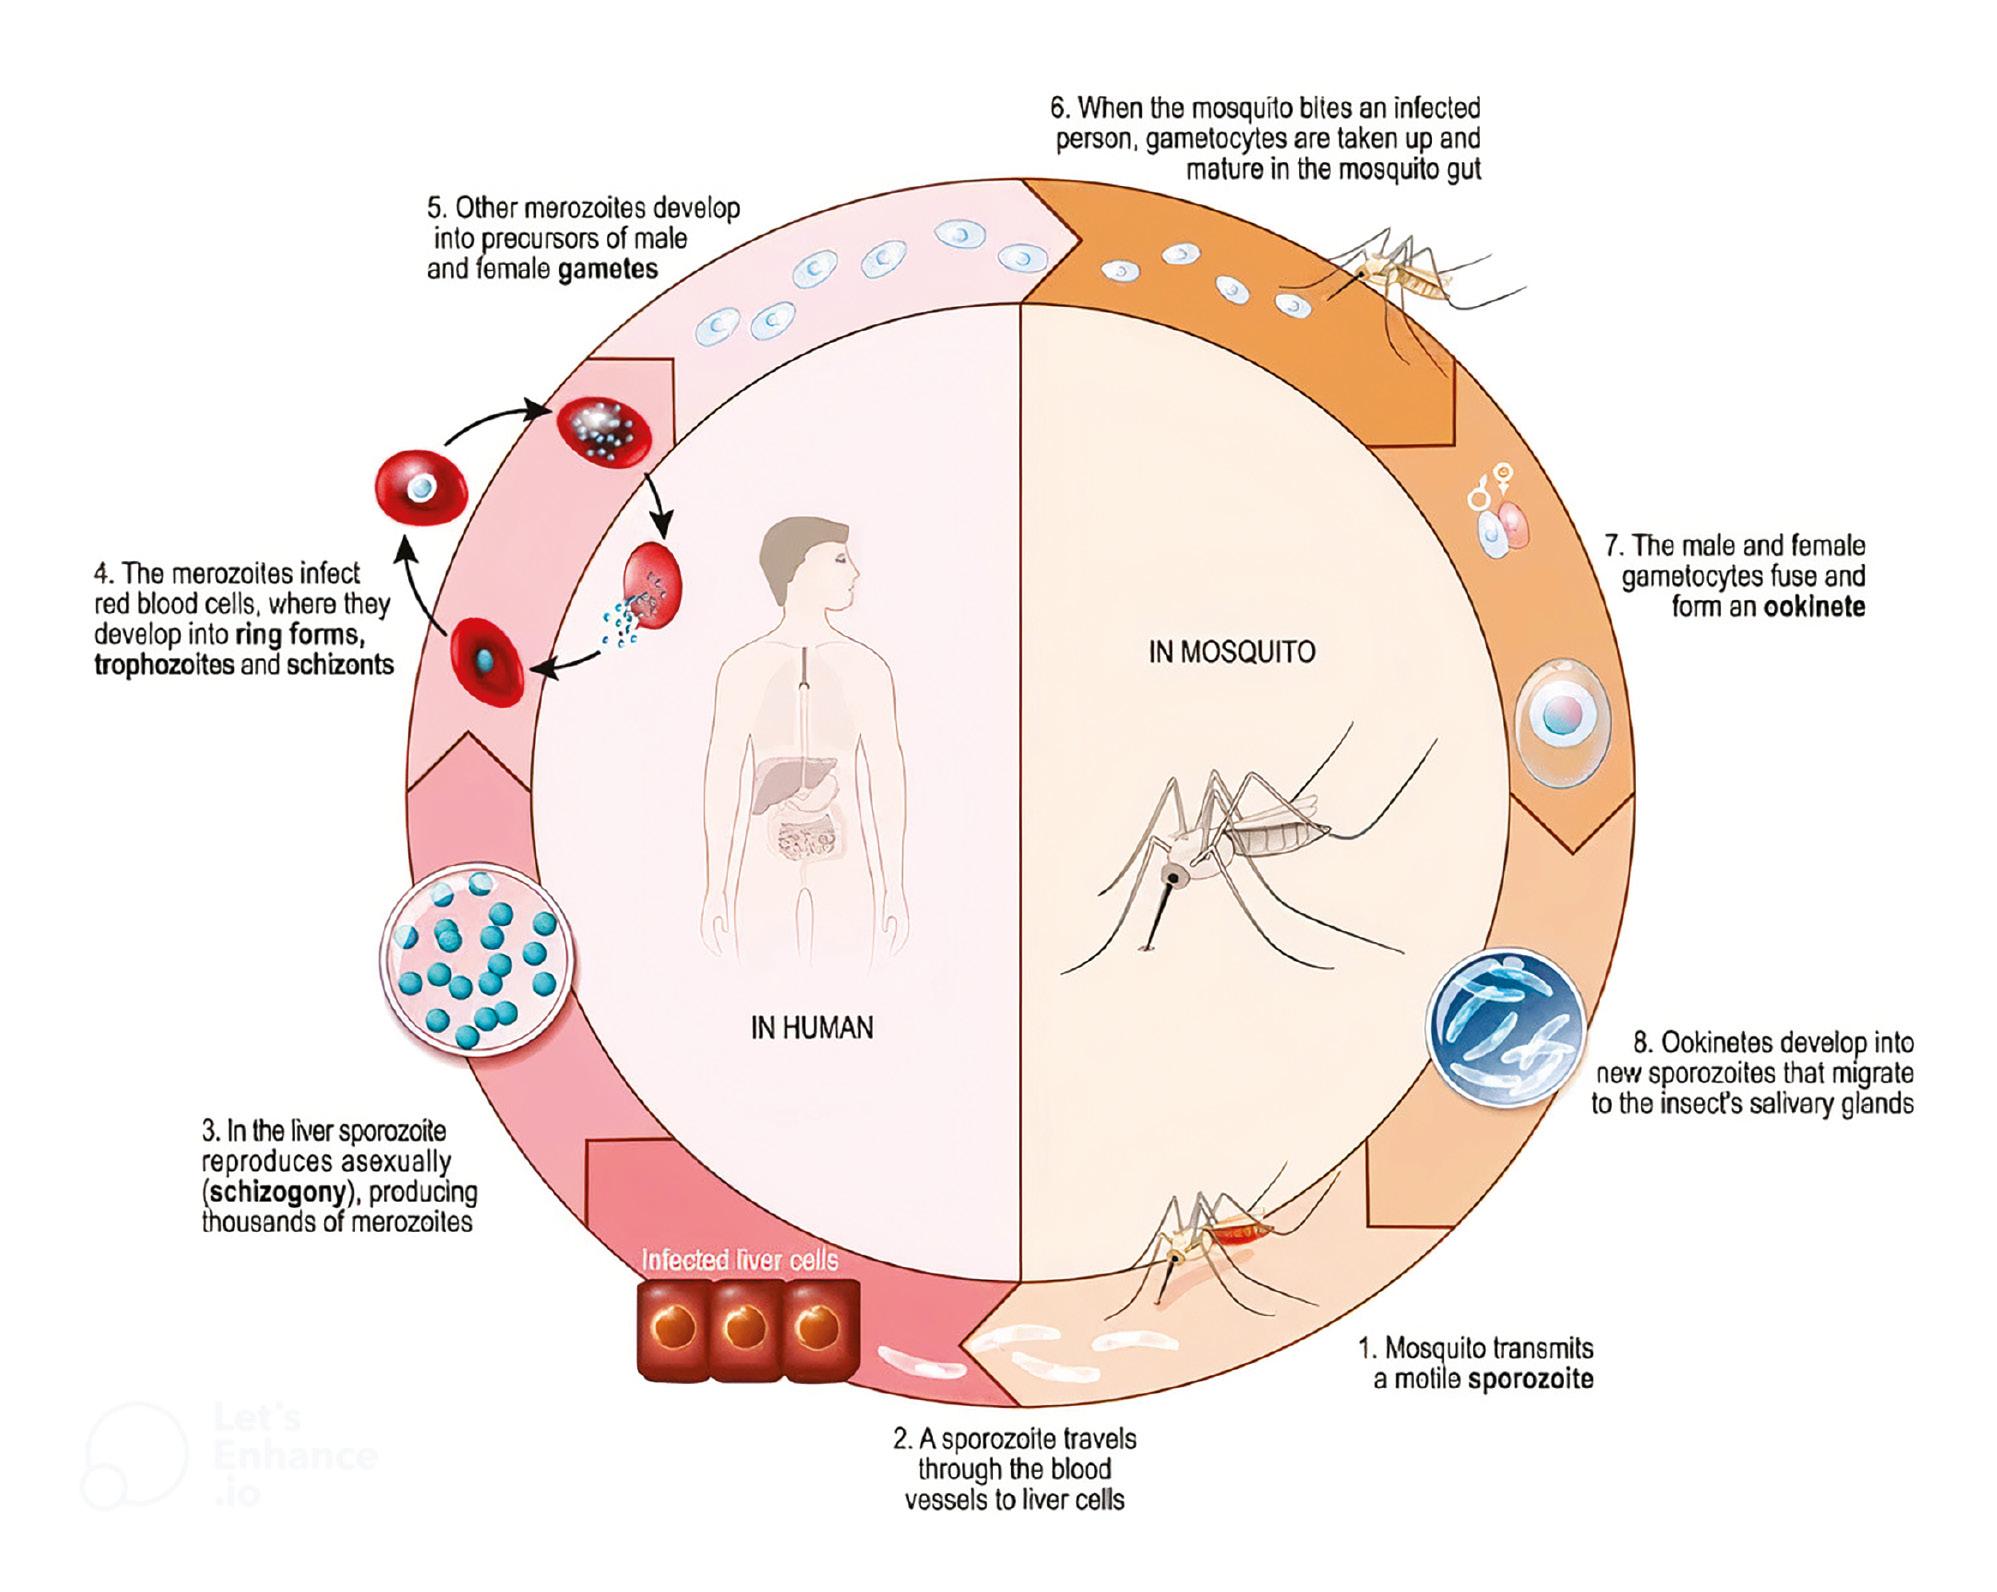 Diagram illustrating the life cycle of a malaria parasite. It depicts various stages including sporozoites injected into human bloodstream, multiplication in liver cells, release of merozoites, invasion of red blood cells, and formation of gametocytes. The cycle continues with mosquito transmission and sporozoite formation.